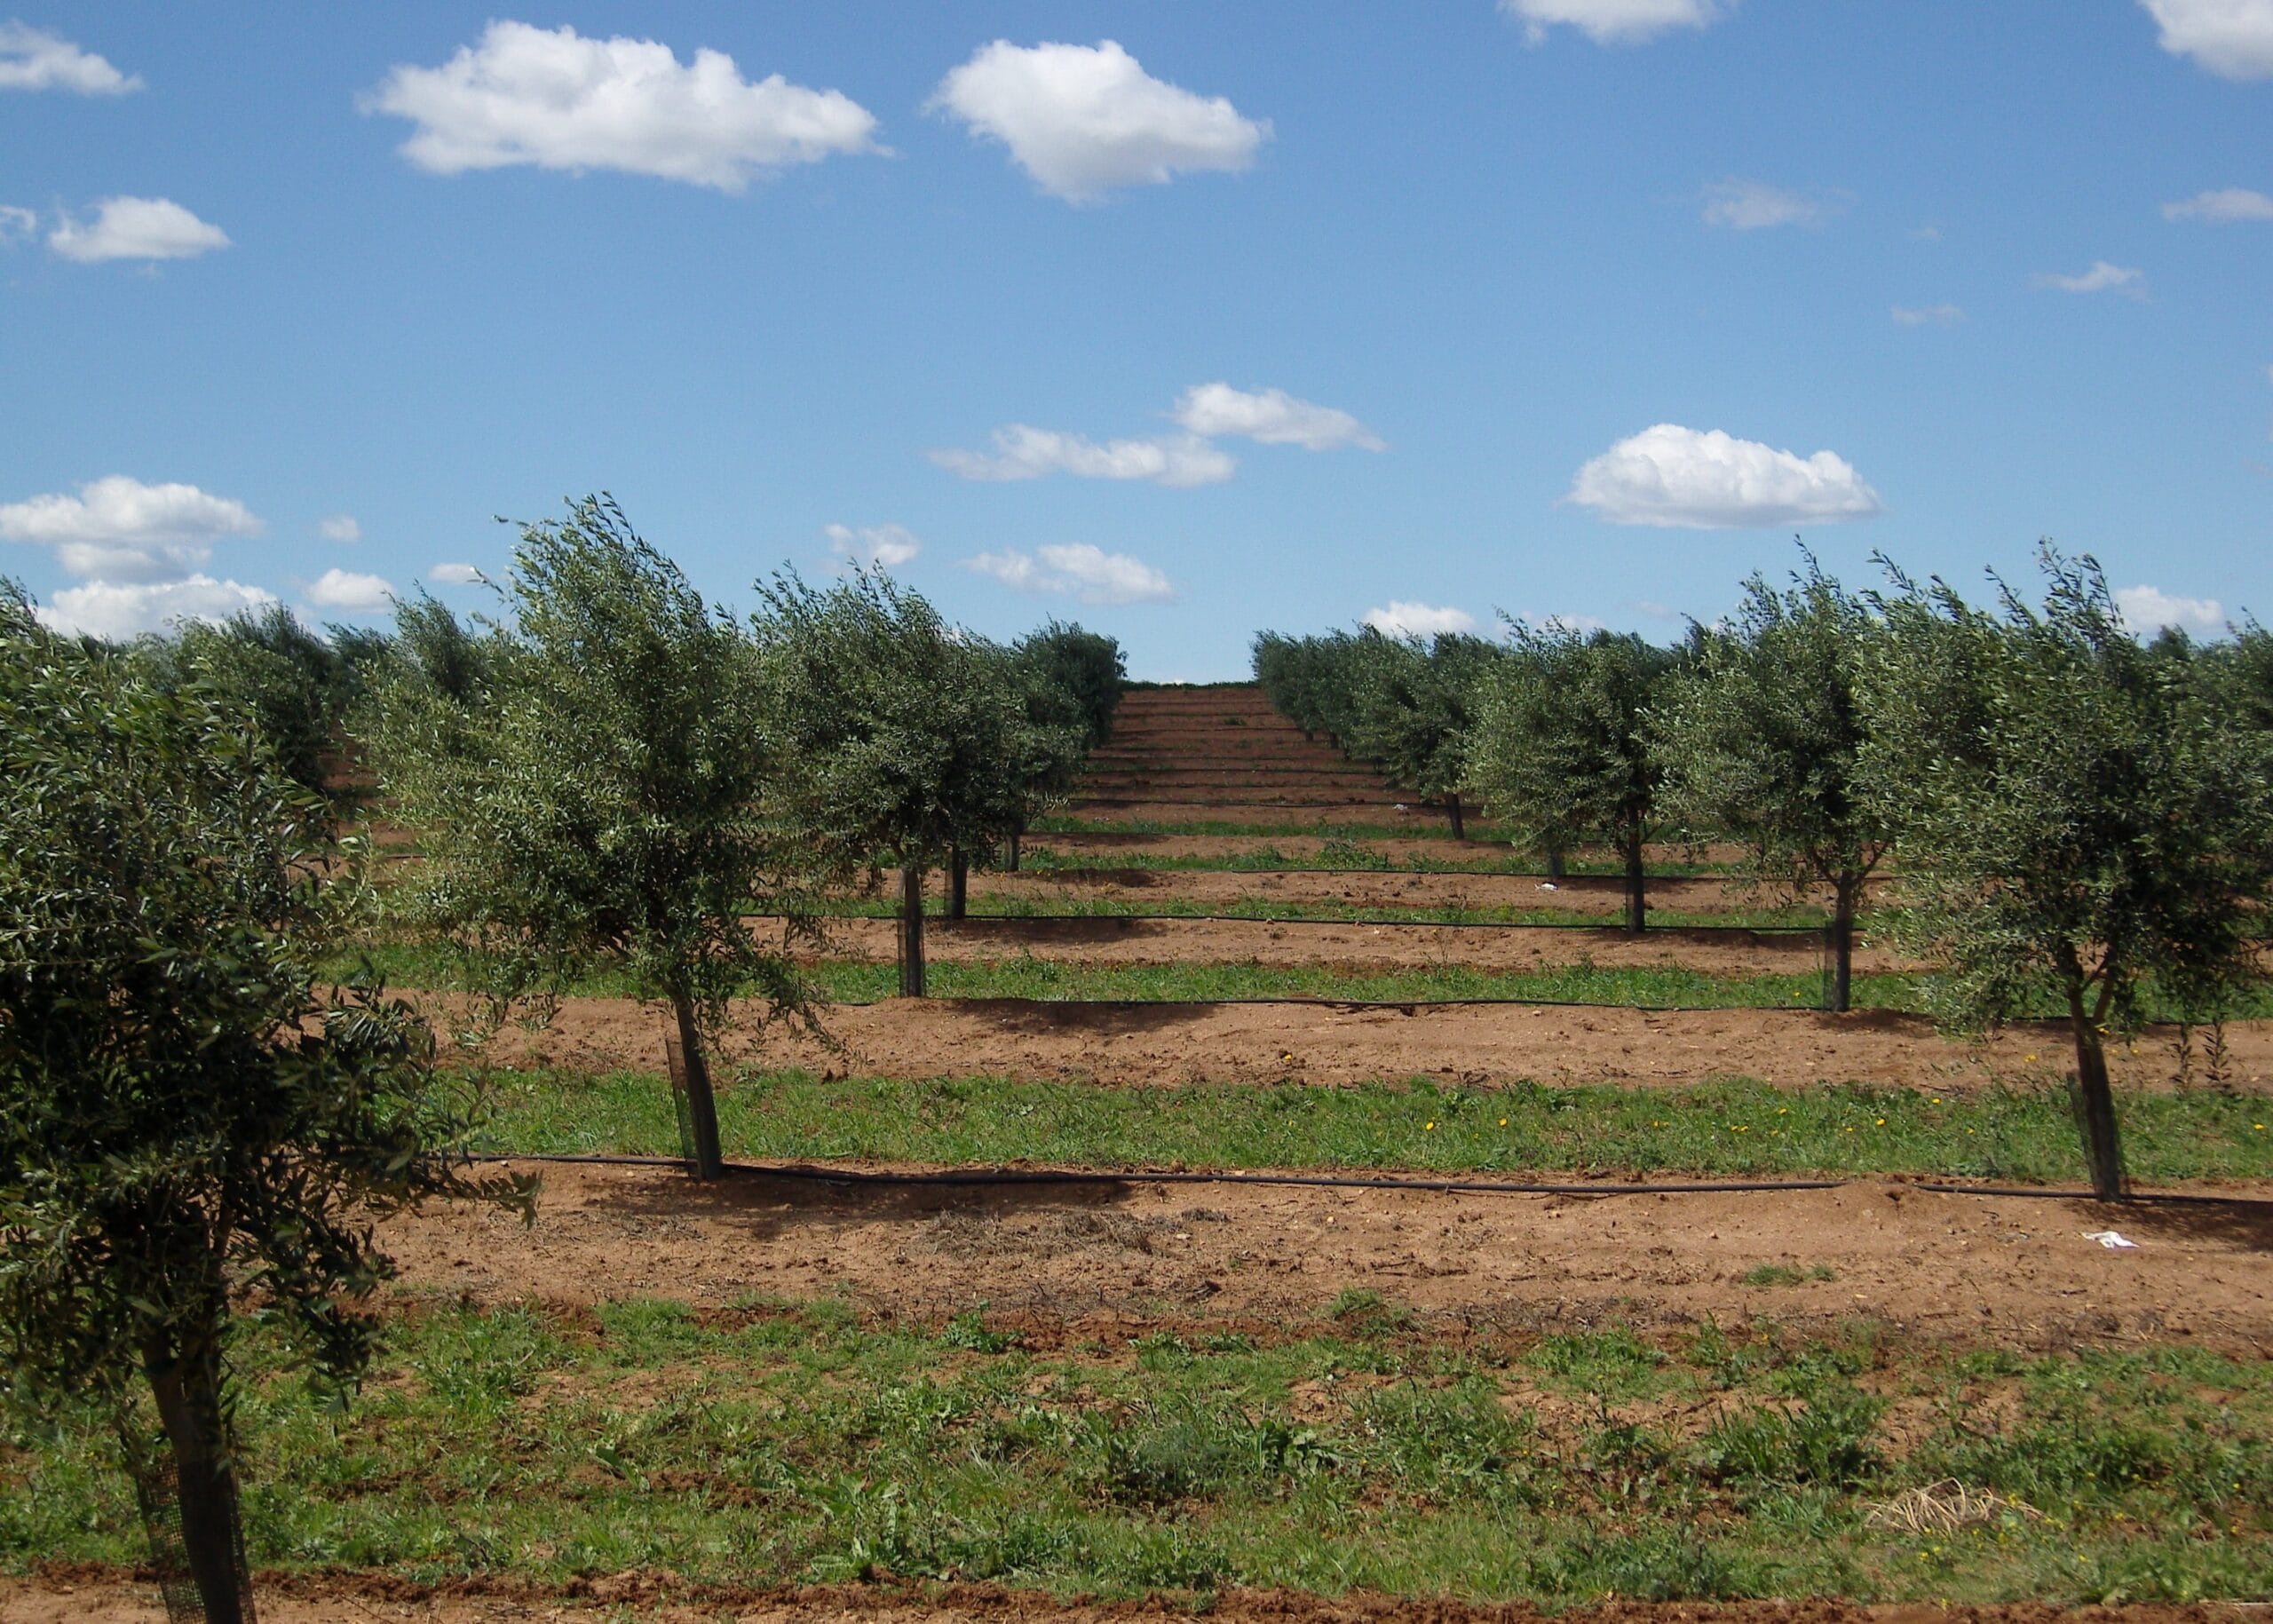 Water usage in olive oil production